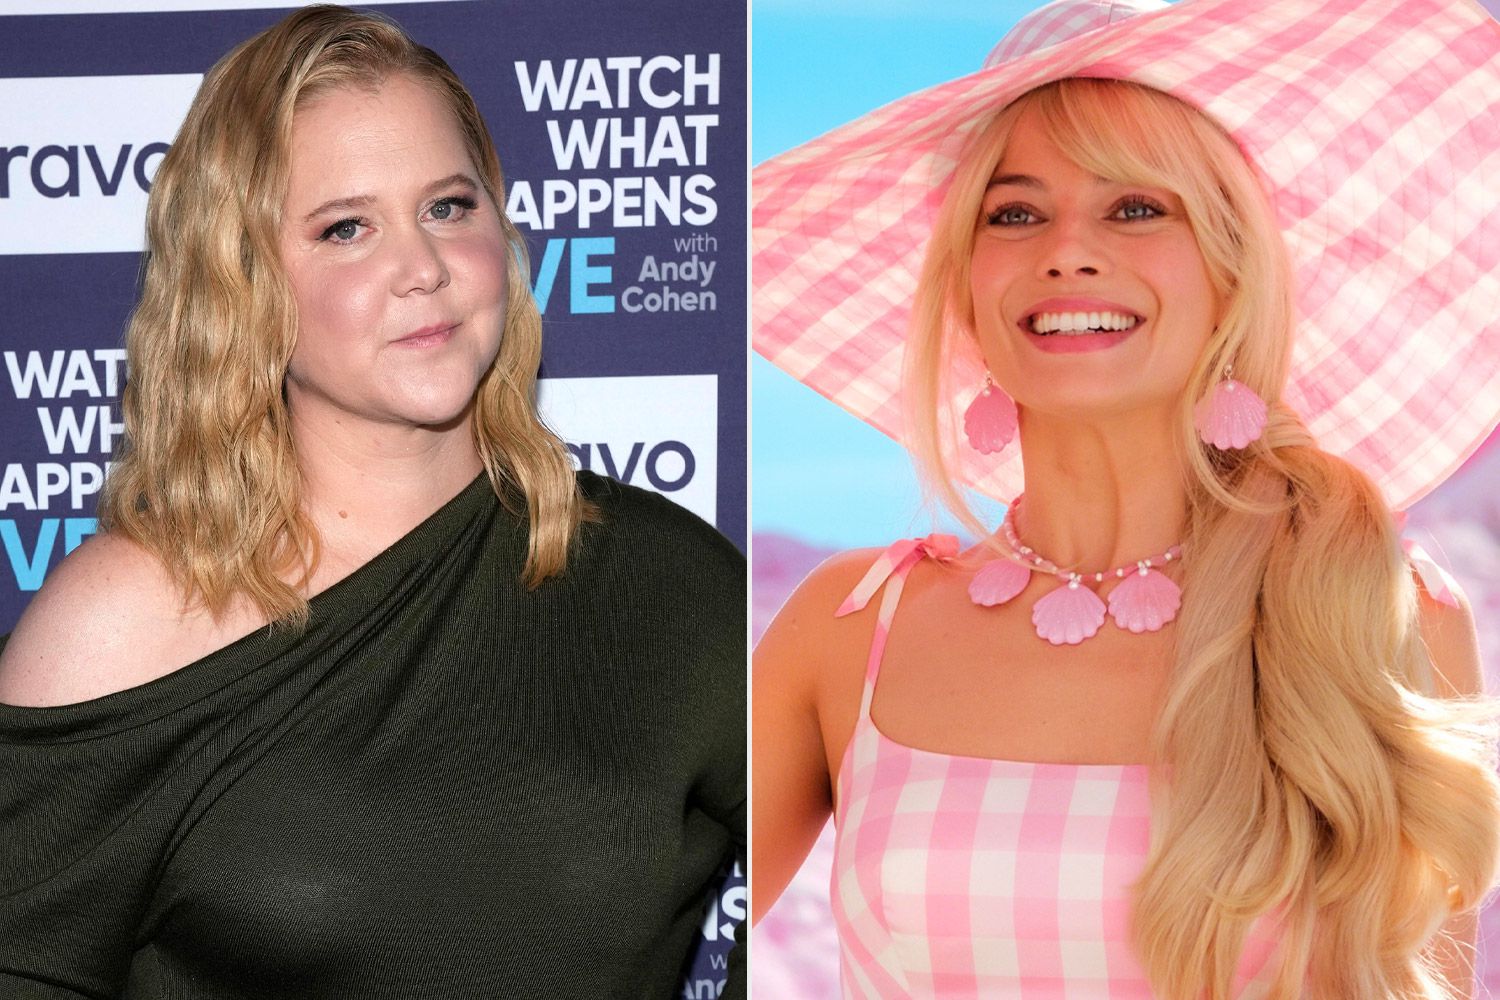 WATCH WHAT HAPPENS LIVE WITH ANDY COHEN -- Episode 20098 -- Pictured: Amy Schumer -- (Photo by: Charles Sykes/Bravo via Getty Images) -BAR-02735 MARGOT ROBBIE as Barbie in Warner Bros. PicturesBARBIEa Warner Bros. Pictures release. Photo by Jaap Buitendijk/Warner Bros.8BIM